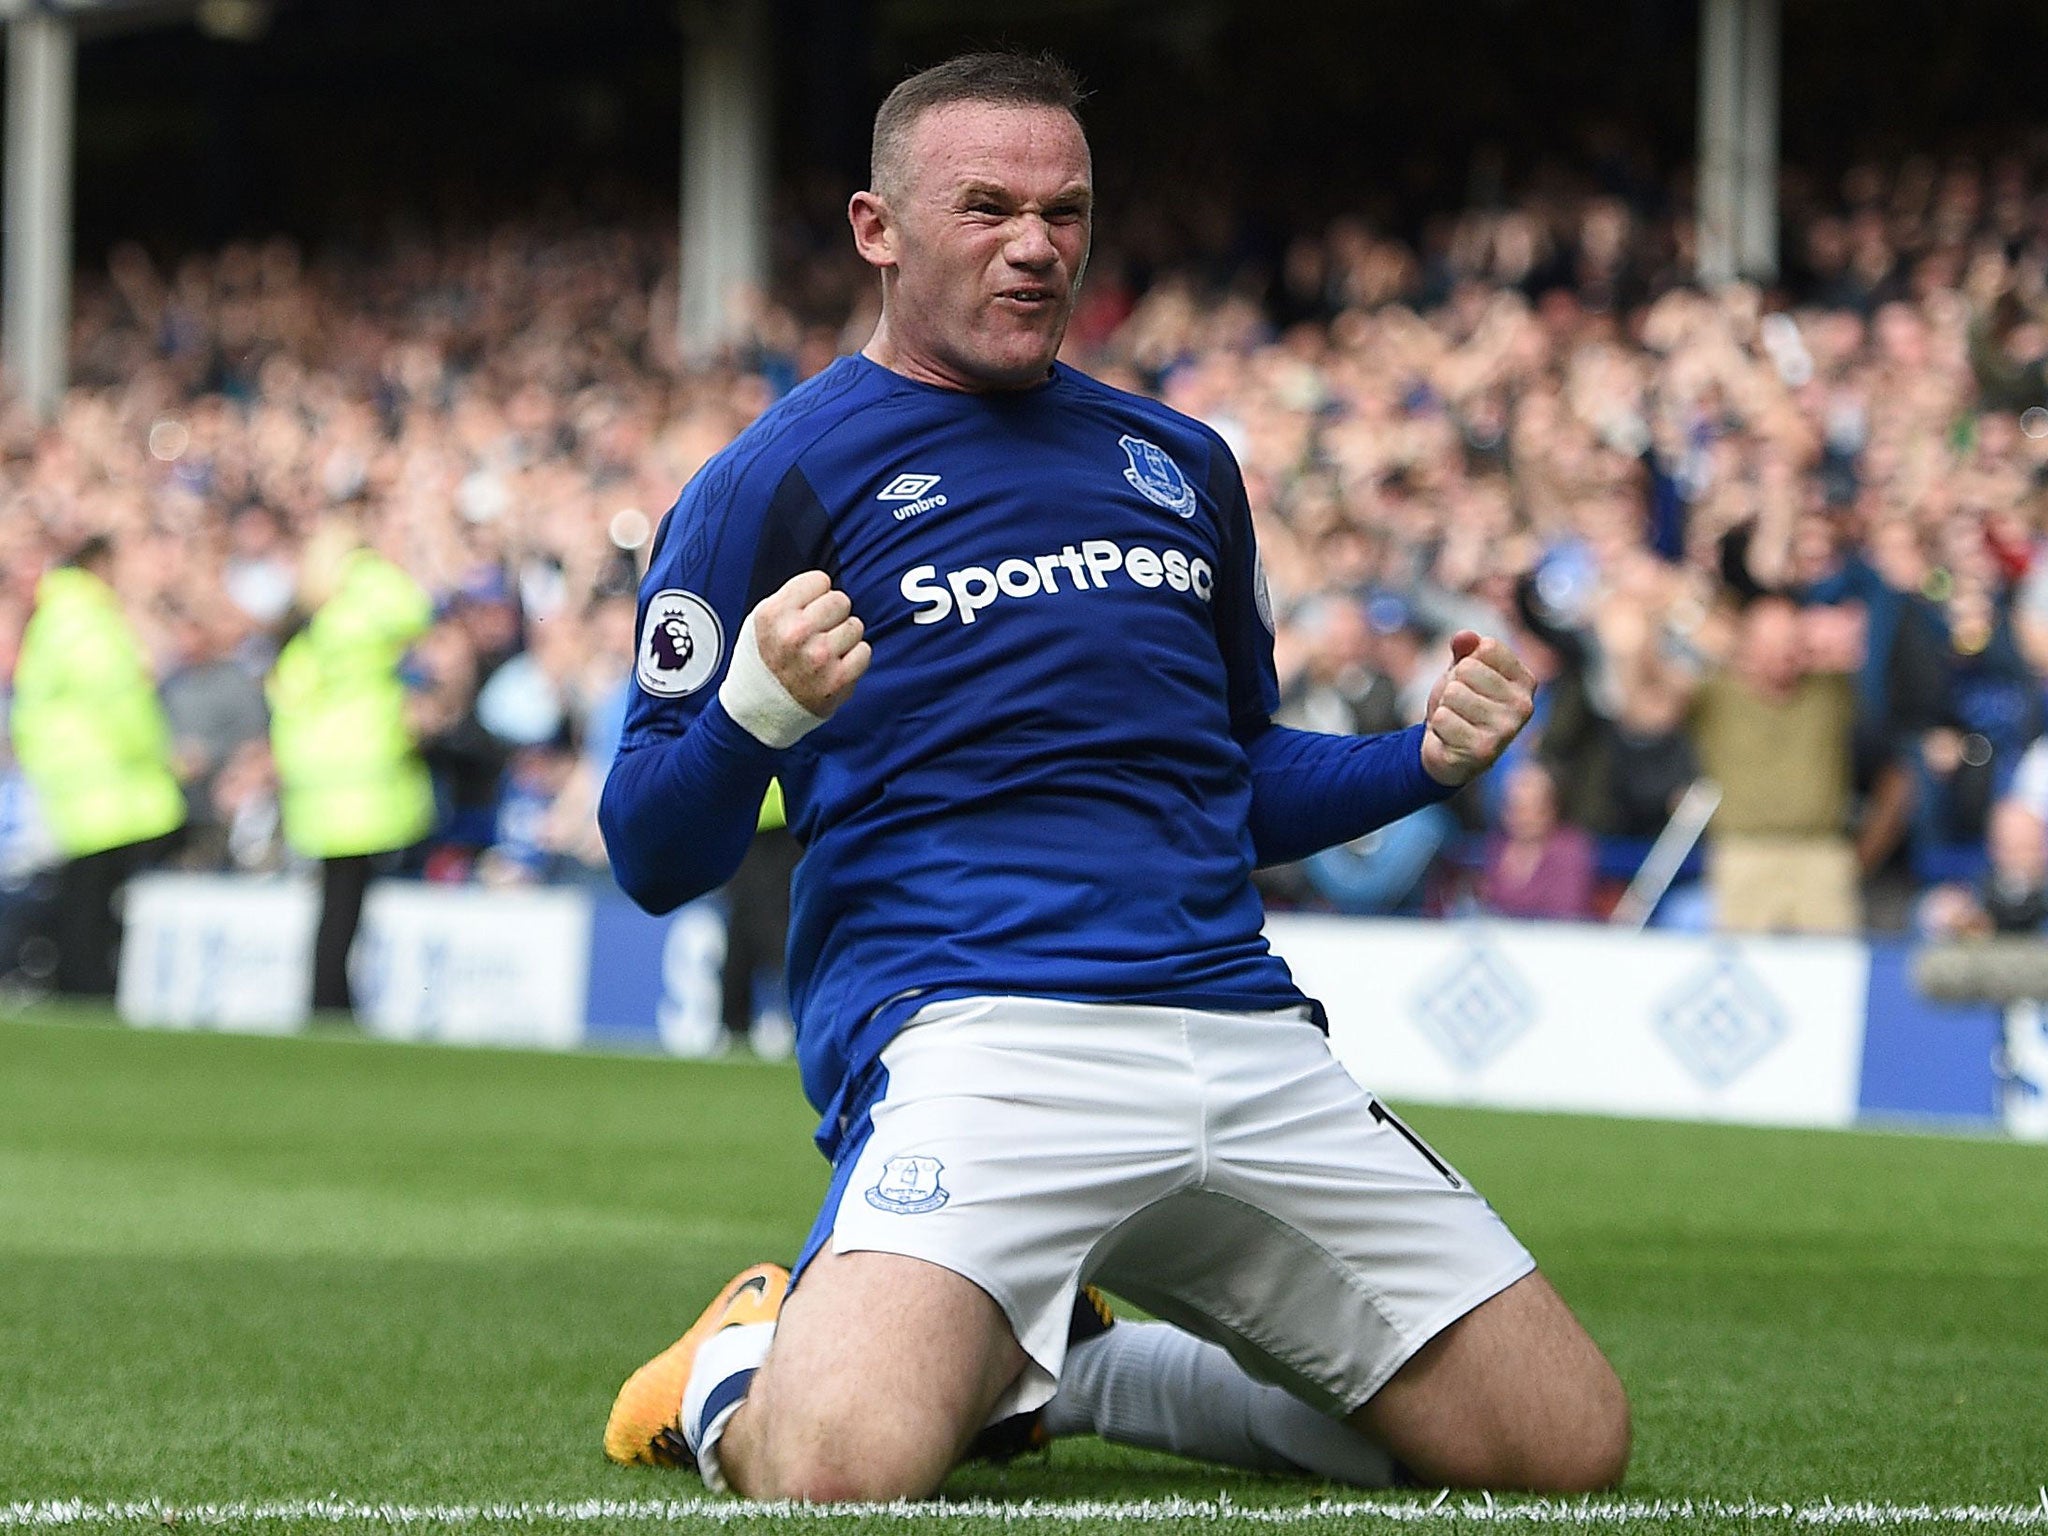 Wayne Rooney will hope to inflict punishment on his former rivals Manchester City